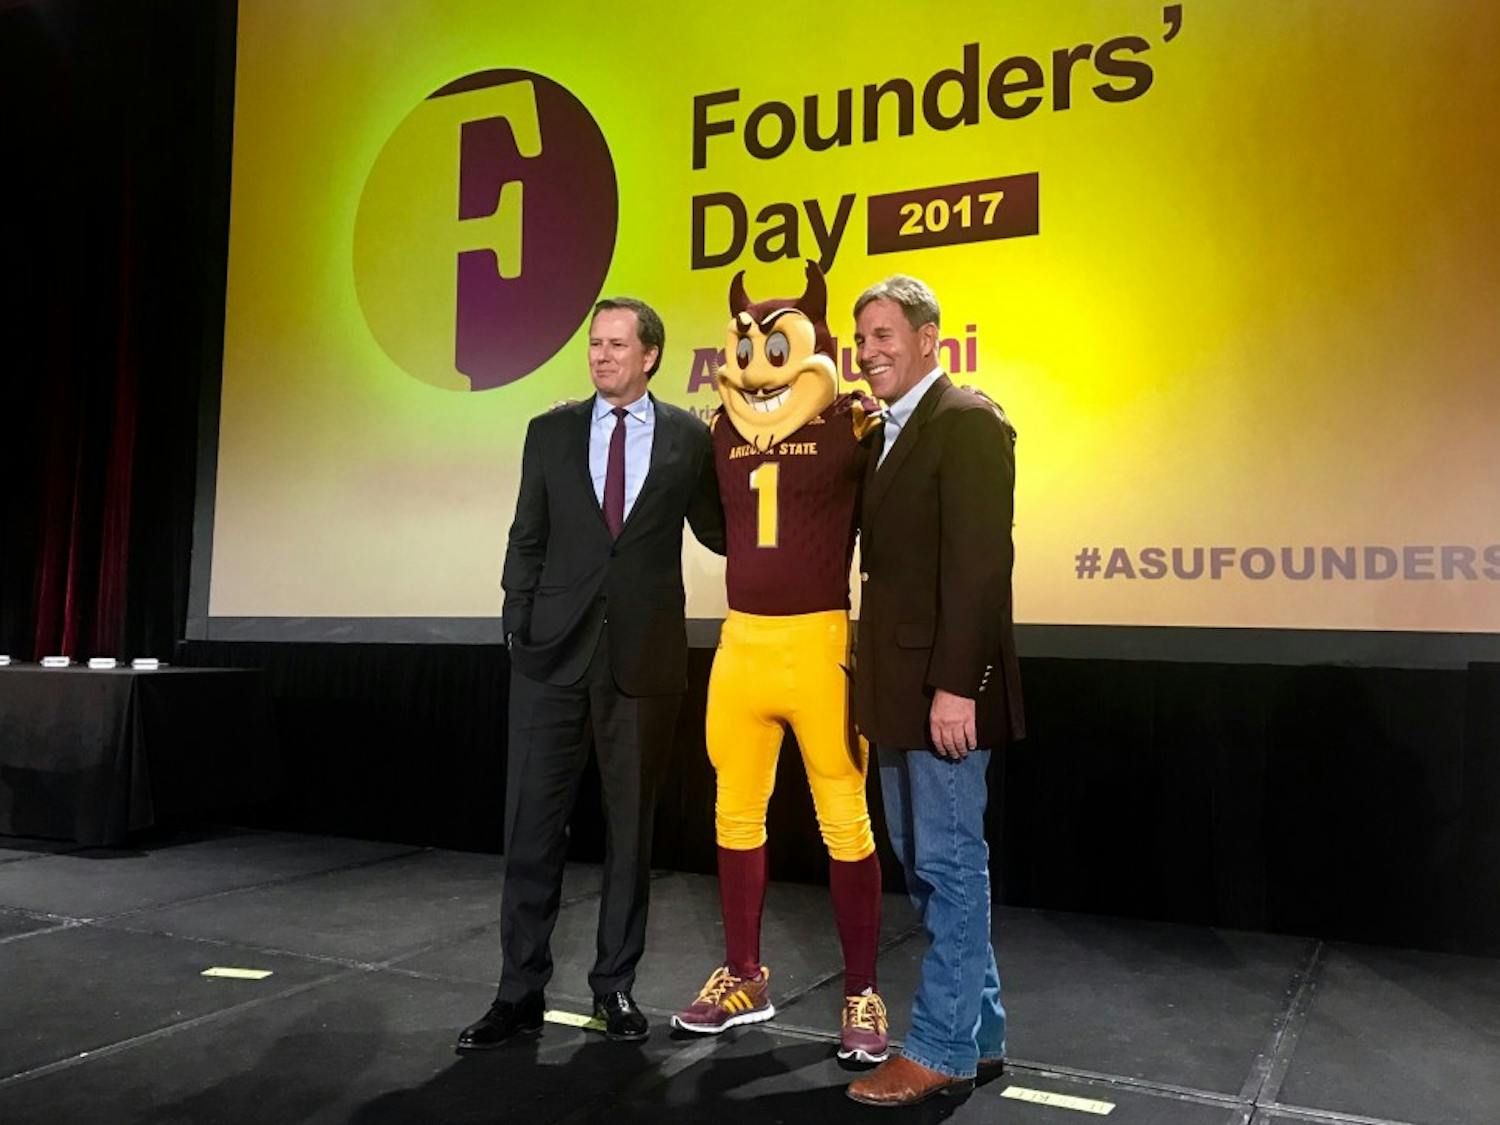 Award recipients&nbsp;Michael Burns and Jack Furst pose with Sparky on Founders' Day 2017.